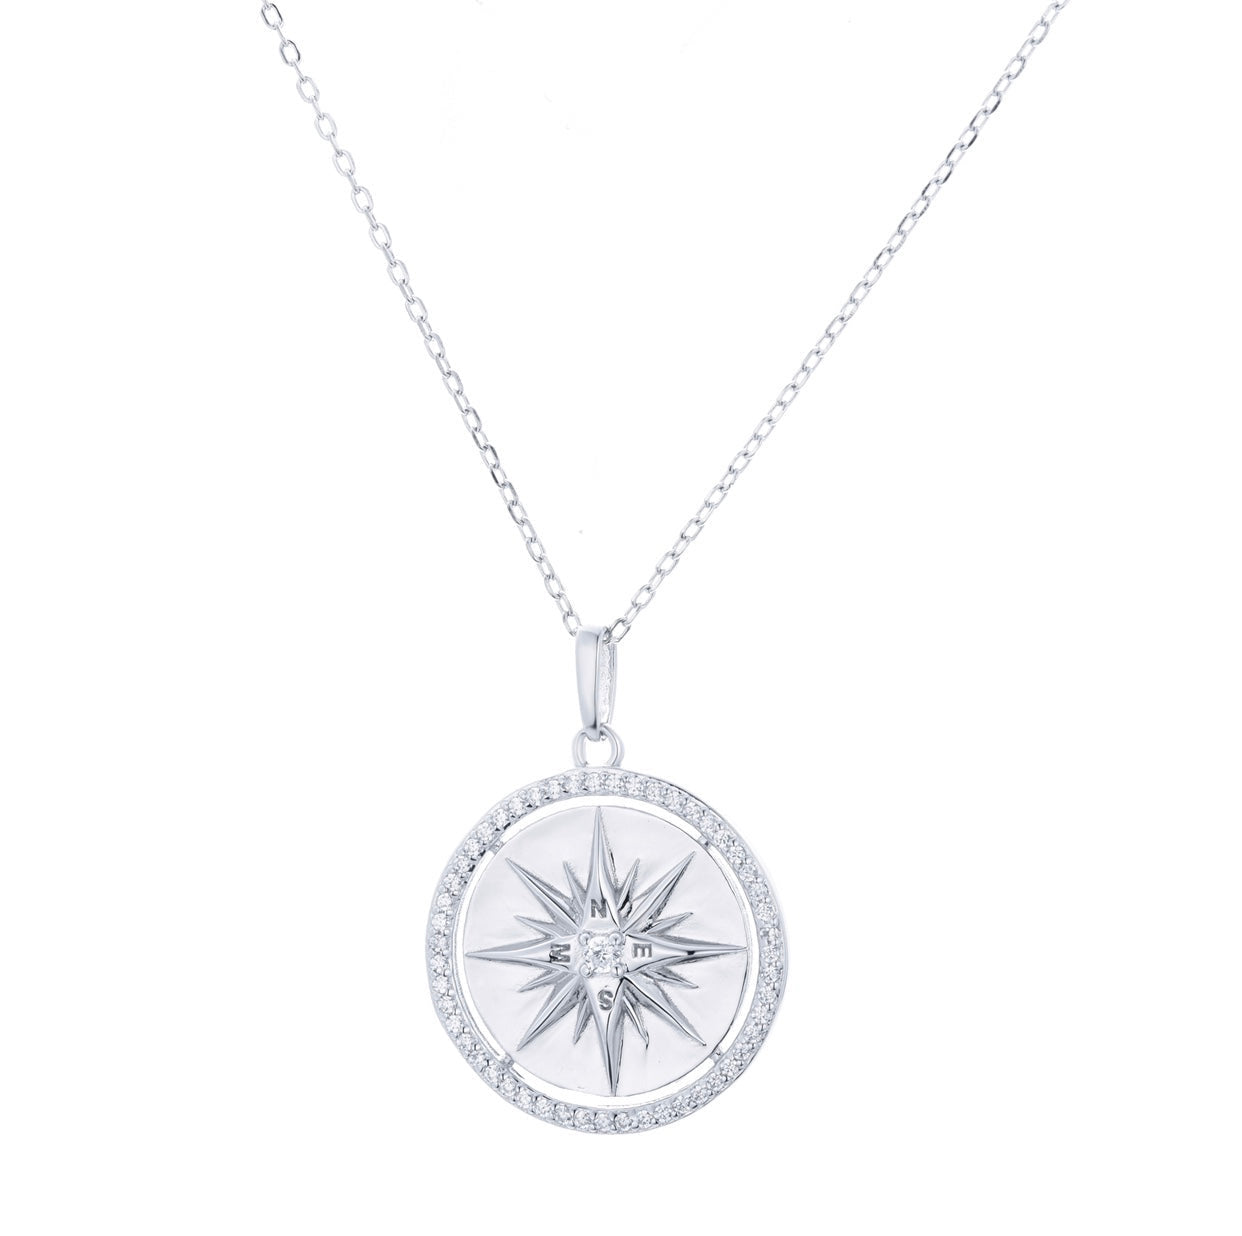 silver compass necklace 